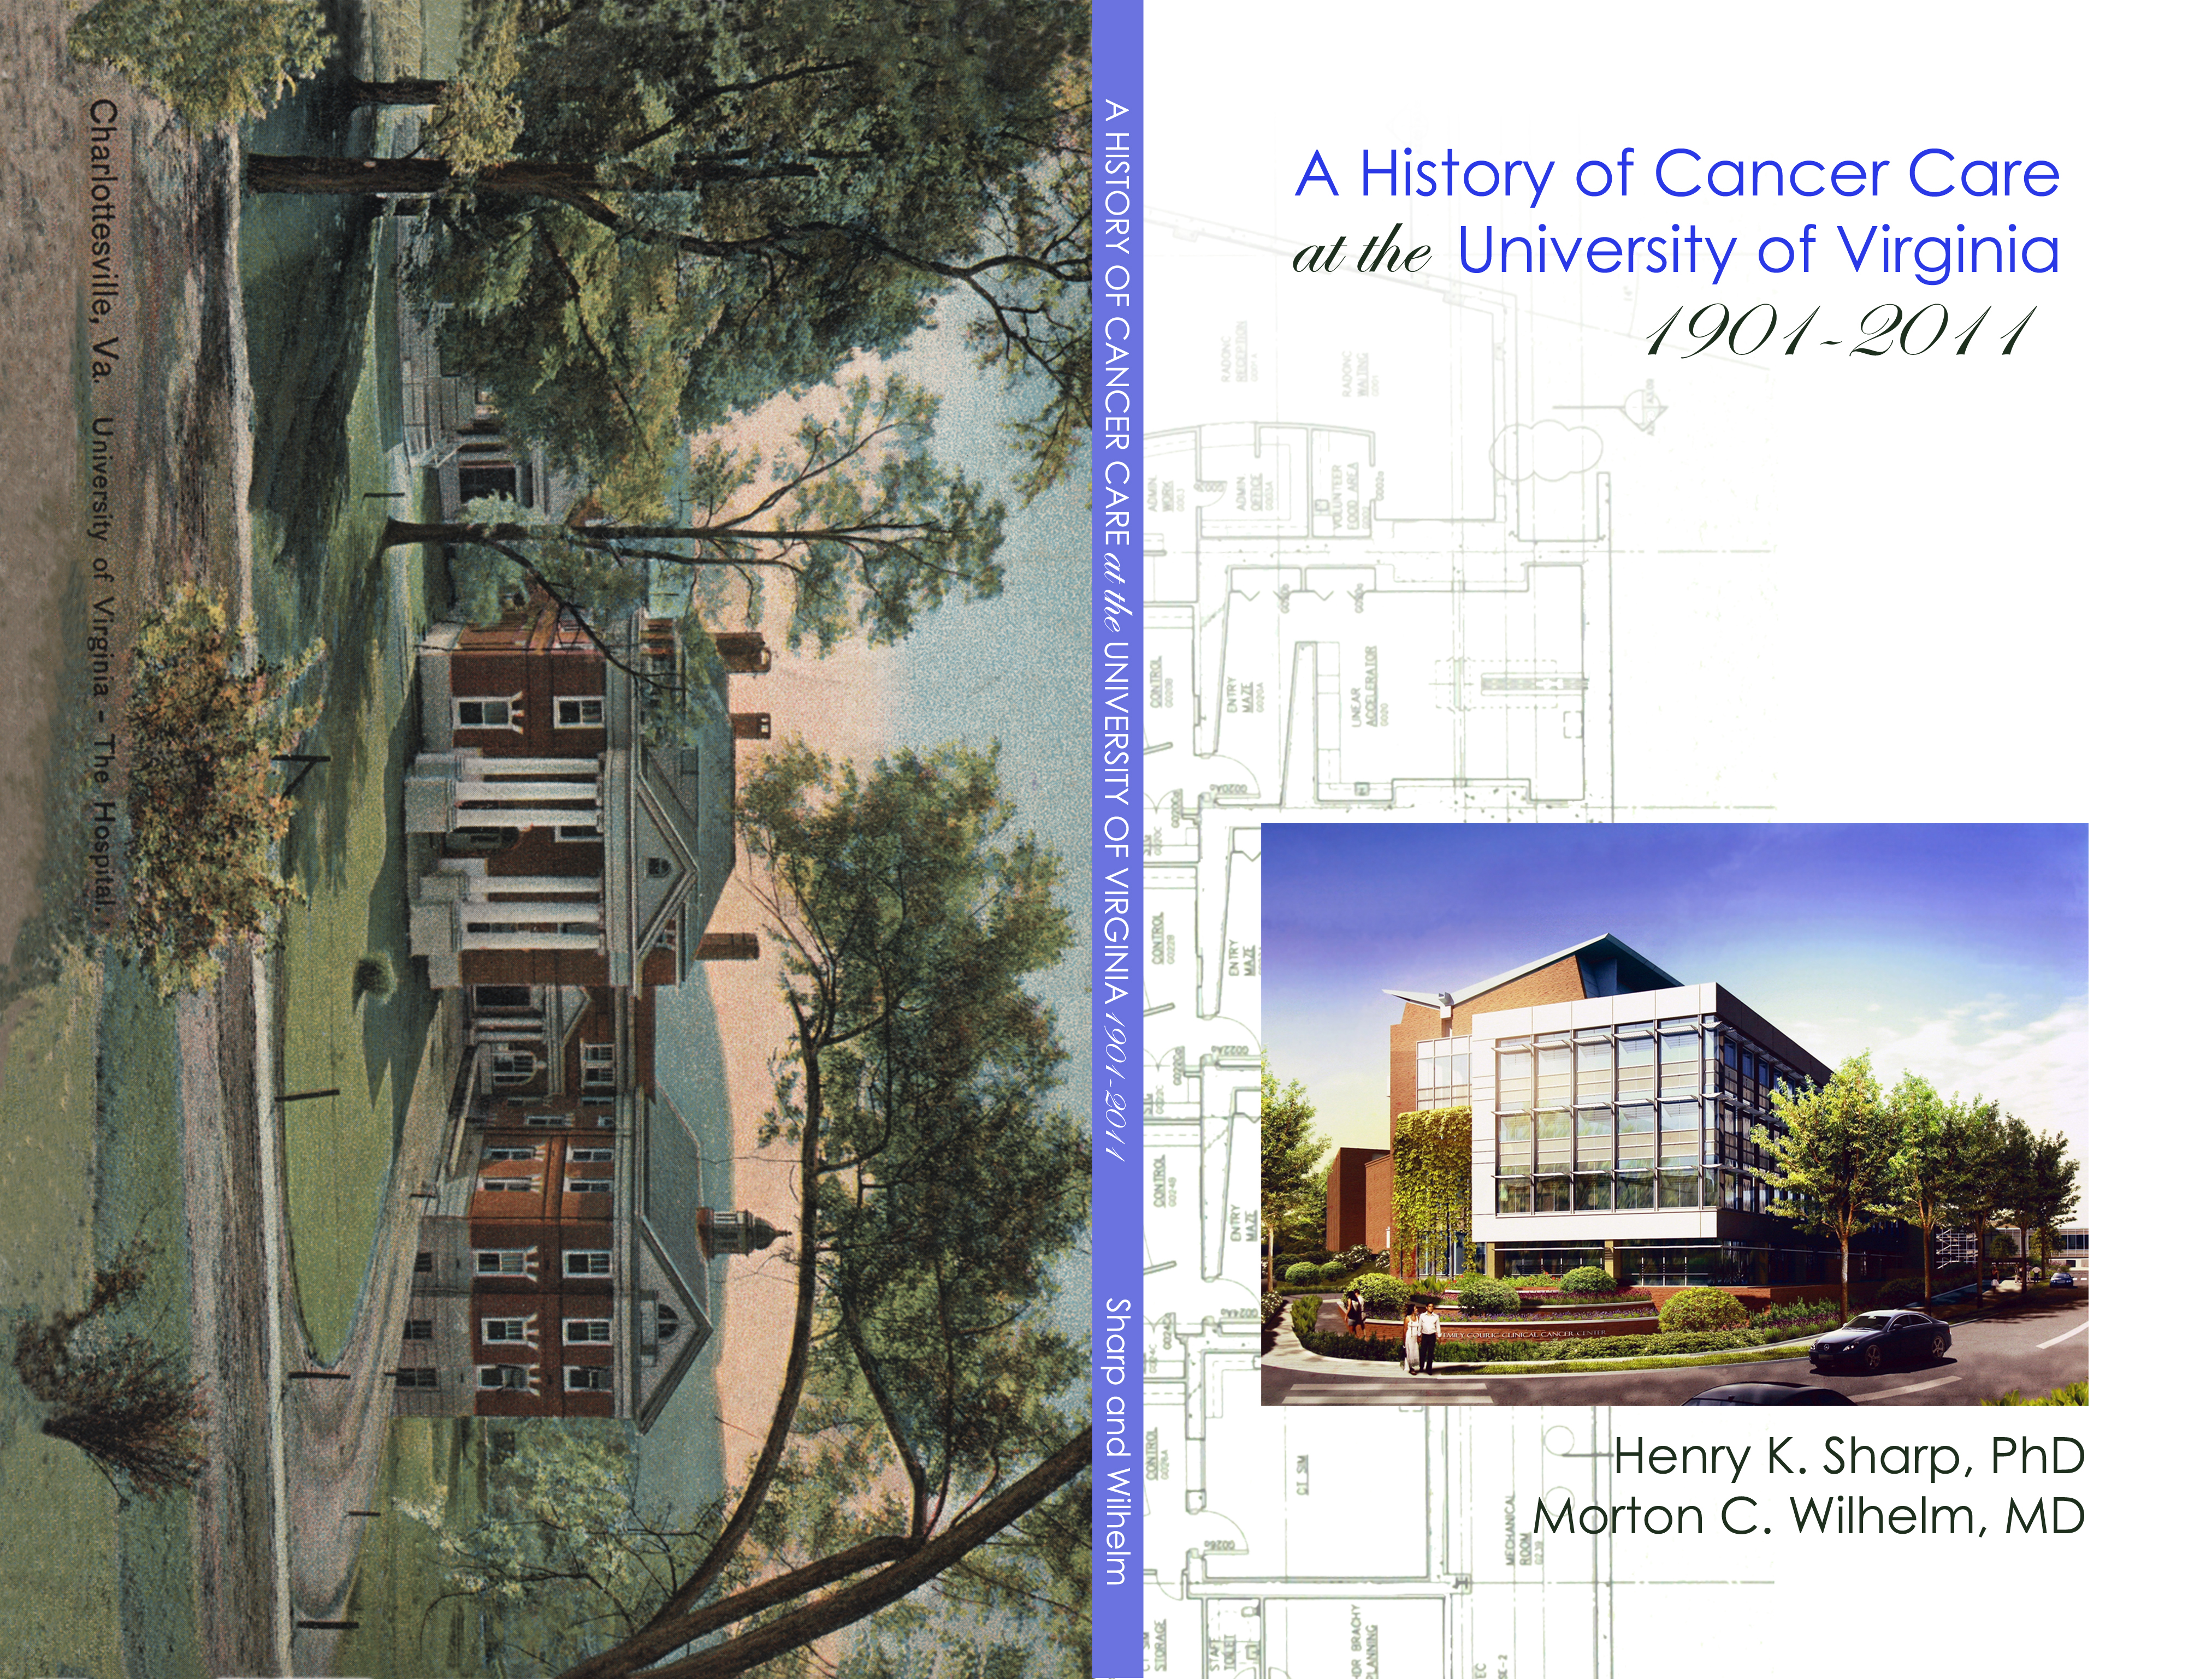 Book cover reads: A history of cancer care at the University of Virginia 1904 - 2011.  Henry K. Sharp, PhD and Morton C. Wilhelm, MD